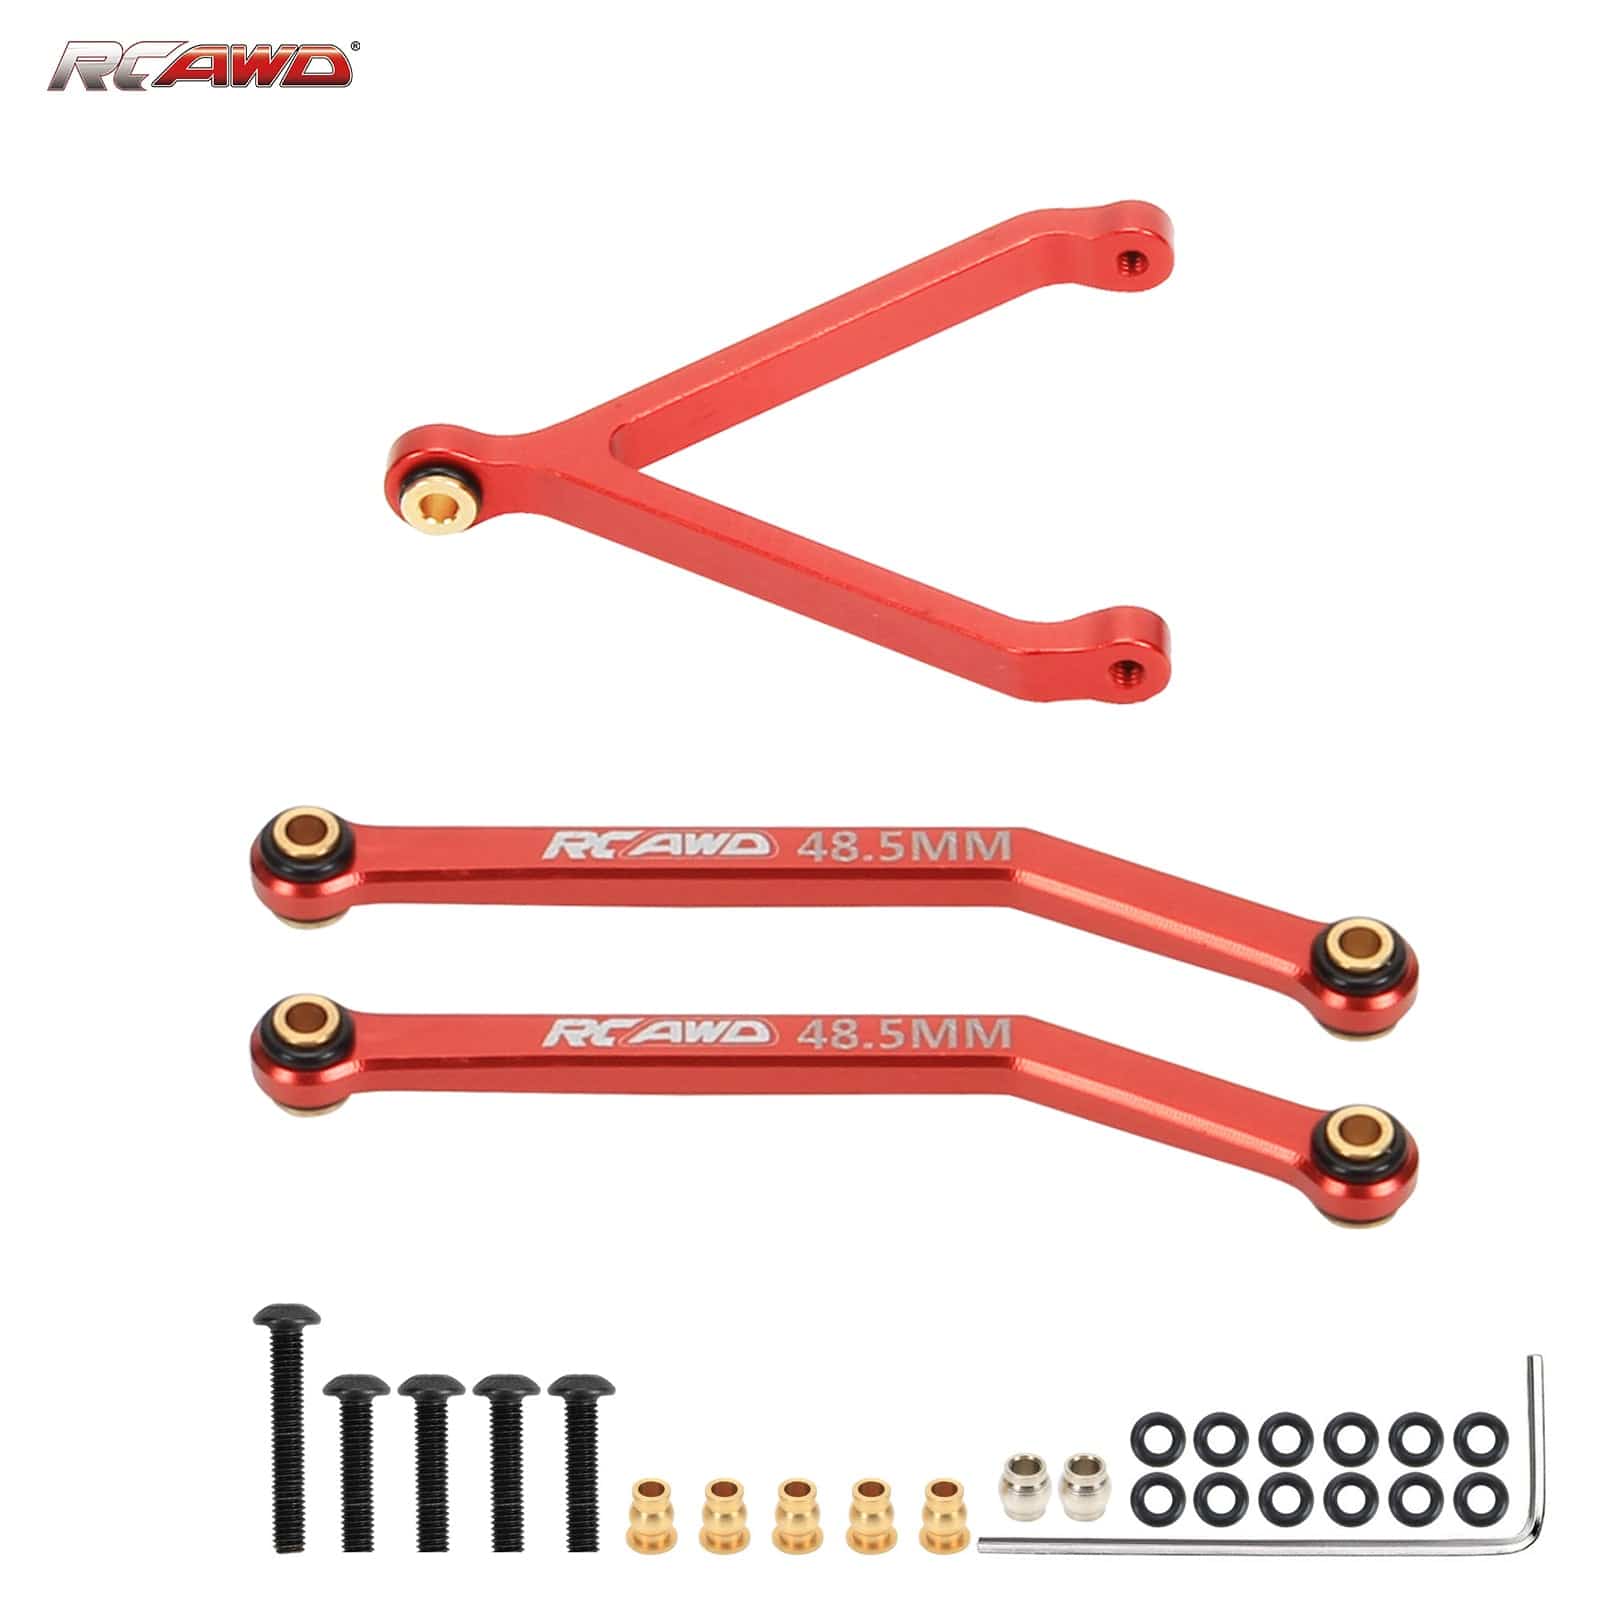 RCAWD FMS FCX24 RCAWD FMS FCX24 High Clearance Links Kit C3070,C3071